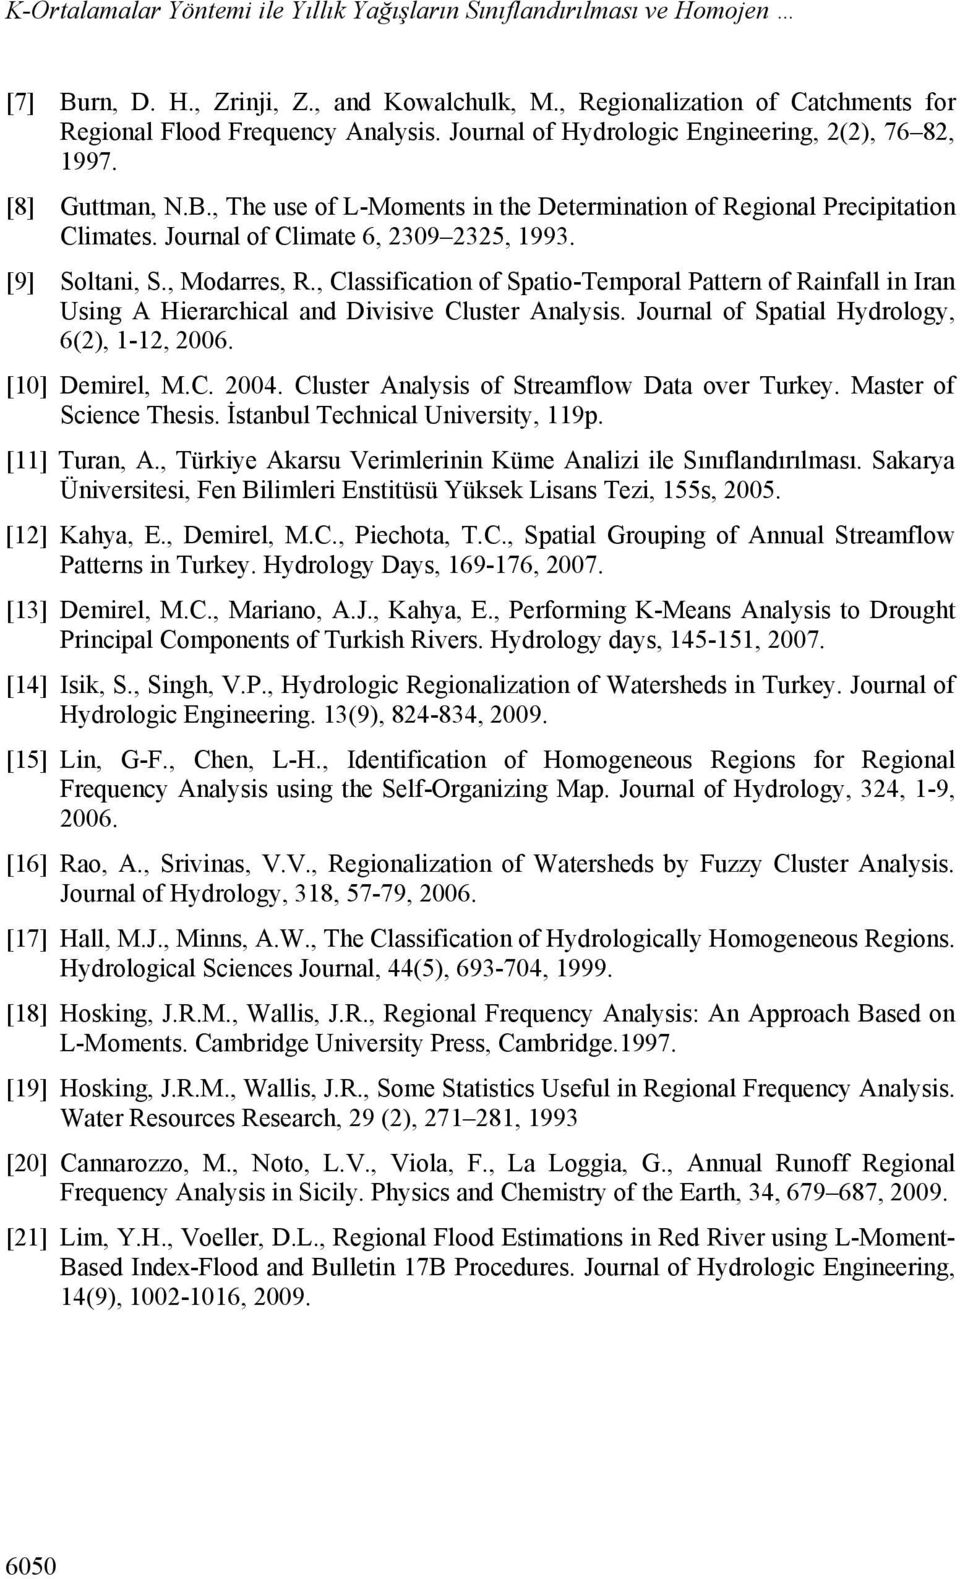 , Modarres,., Classfcaton of Spato-Temporal Pattern of anfall n Iran Usng A Herarchcal and Dvsve Cluster Analyss. Journal of Spatal Hydrology, 6(2), 1-12, 2006. [10] Demrel, M.C. 2004.